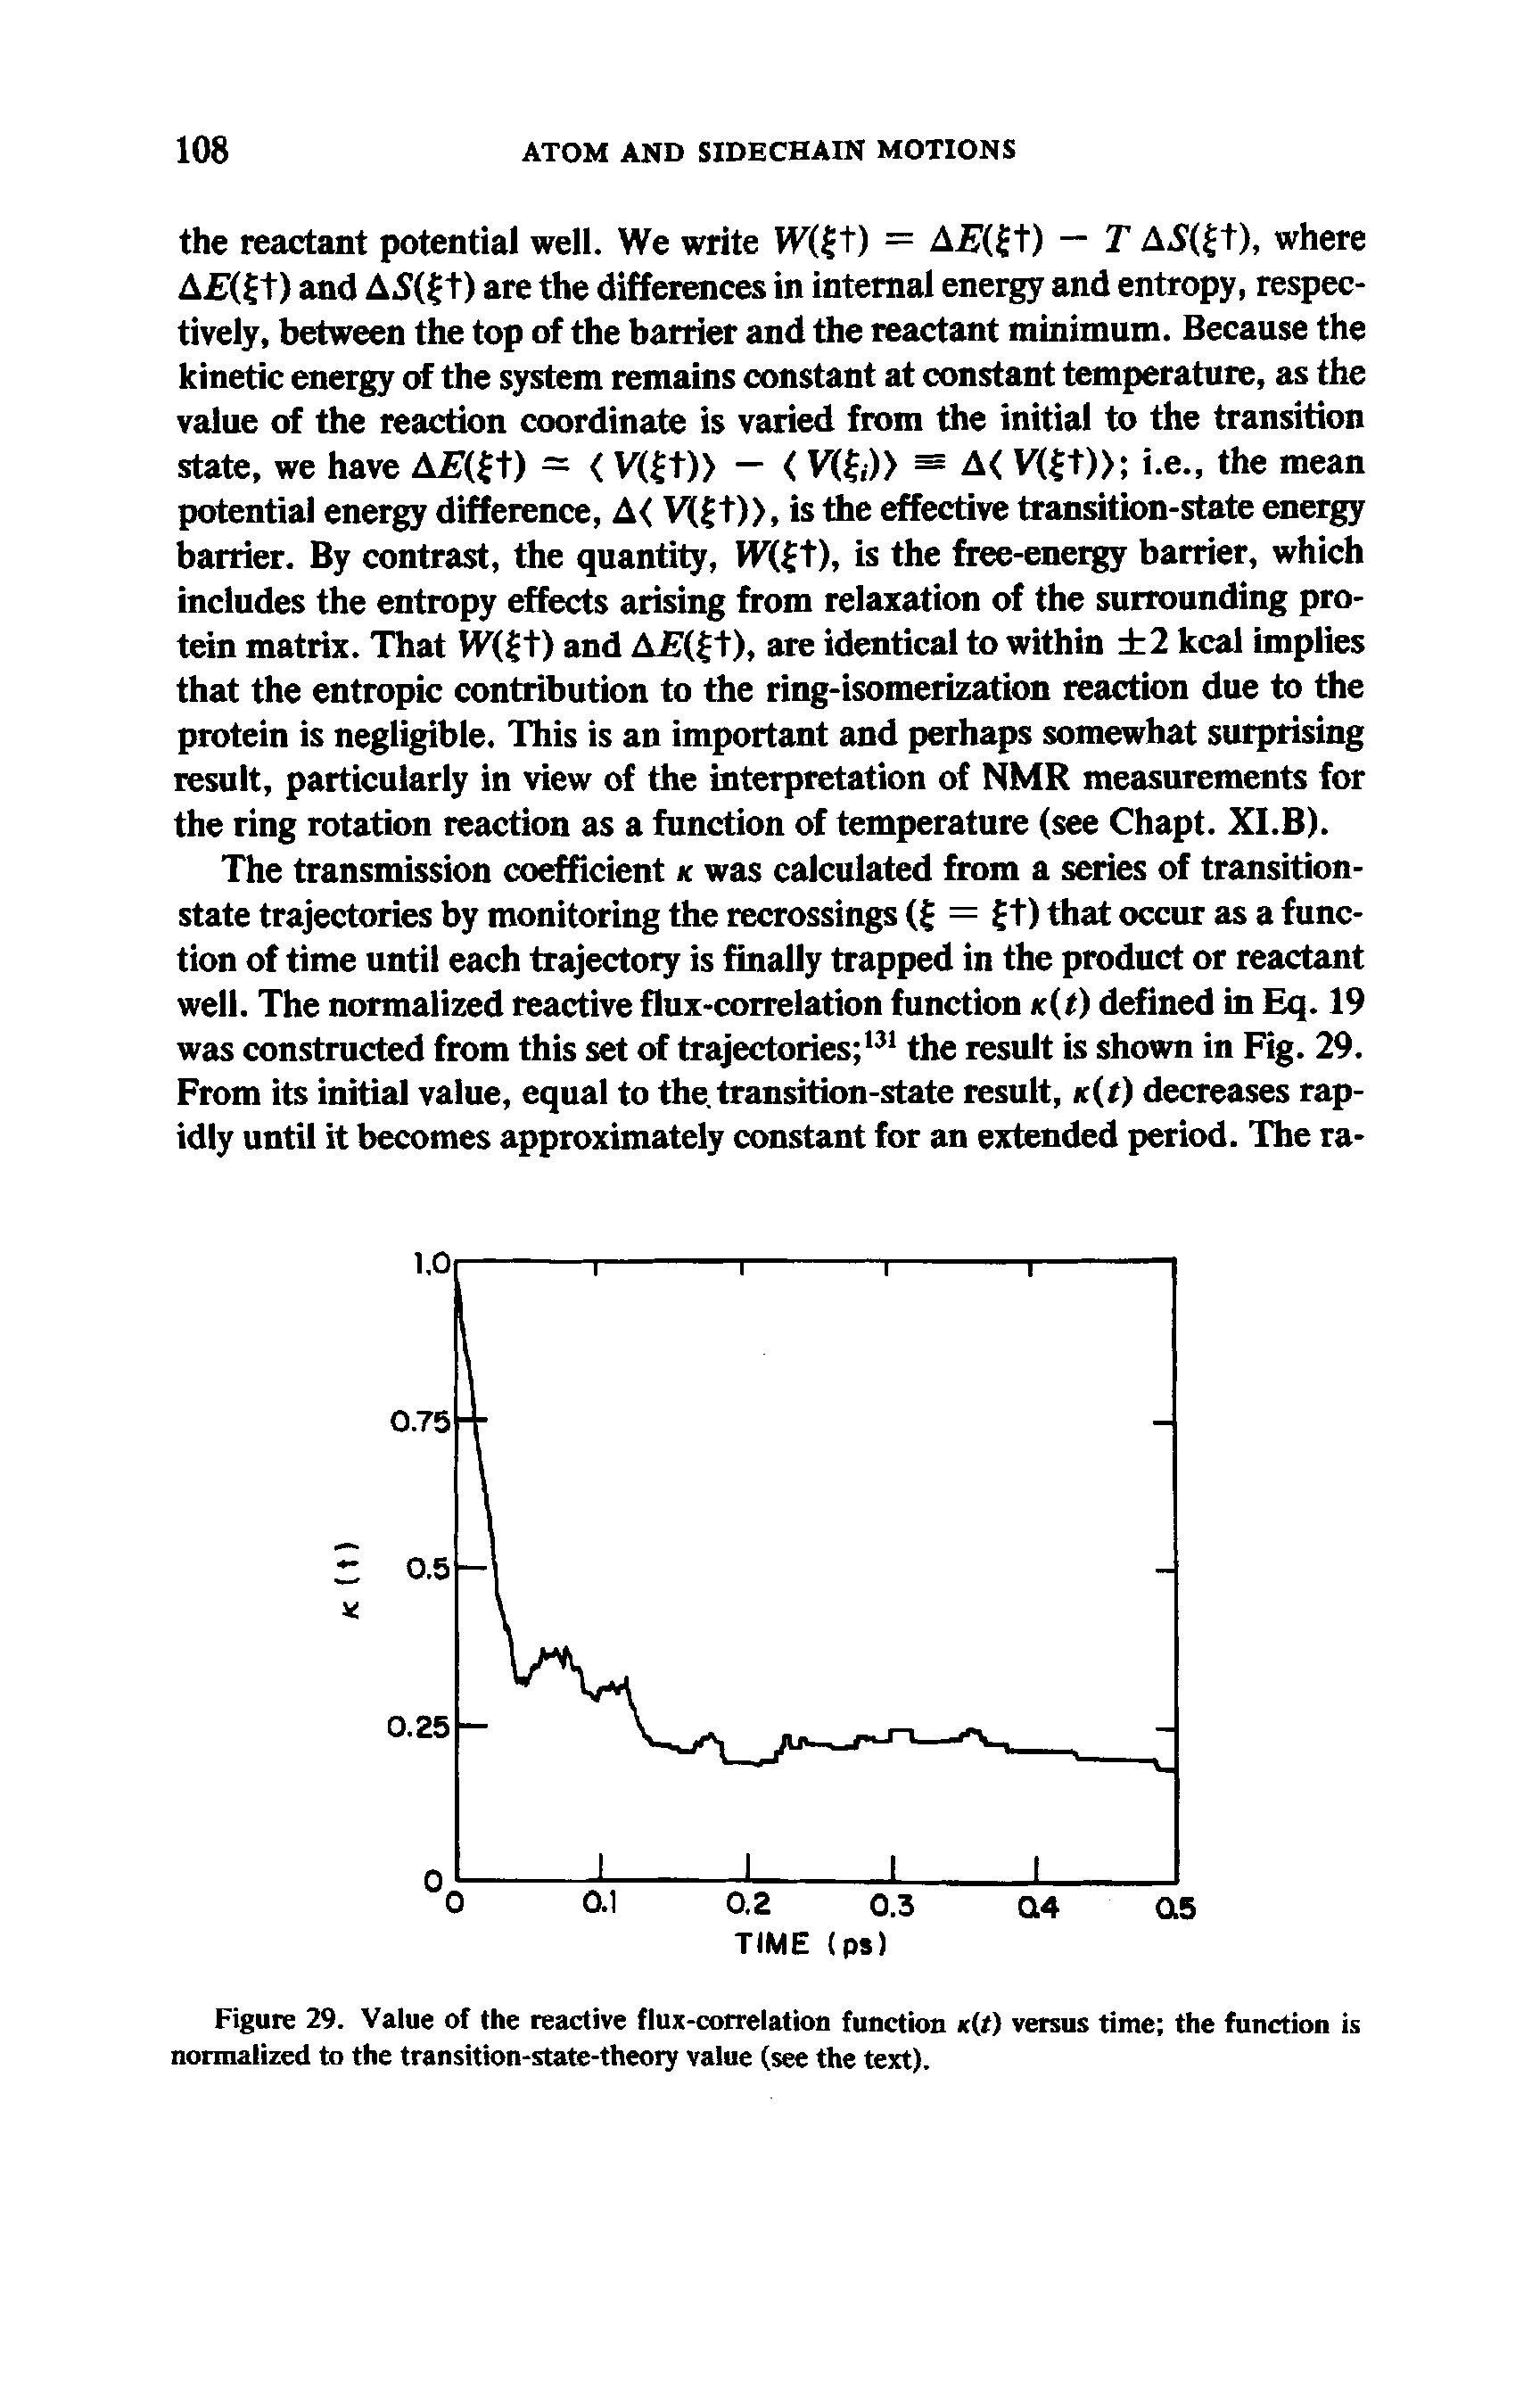 Figure 29. Value of the reactive flux-correlation function (/) versus time the function is normalized to the transition-state-theory value (see the text).